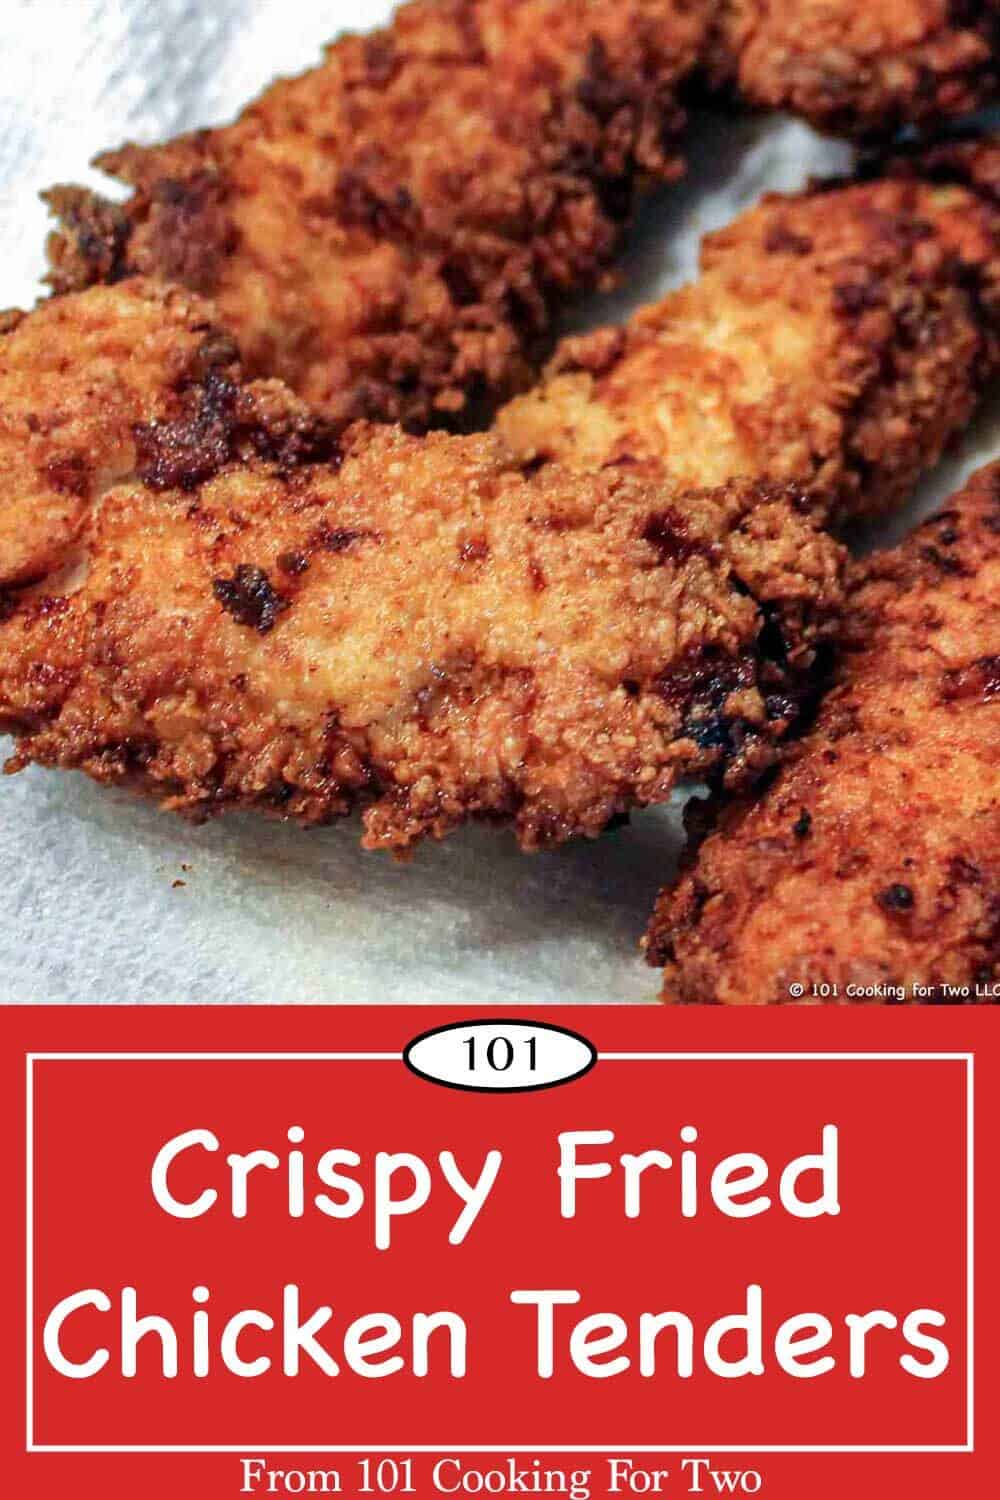 Crispy Fried Chicken Tenders 101 Cooking For Two